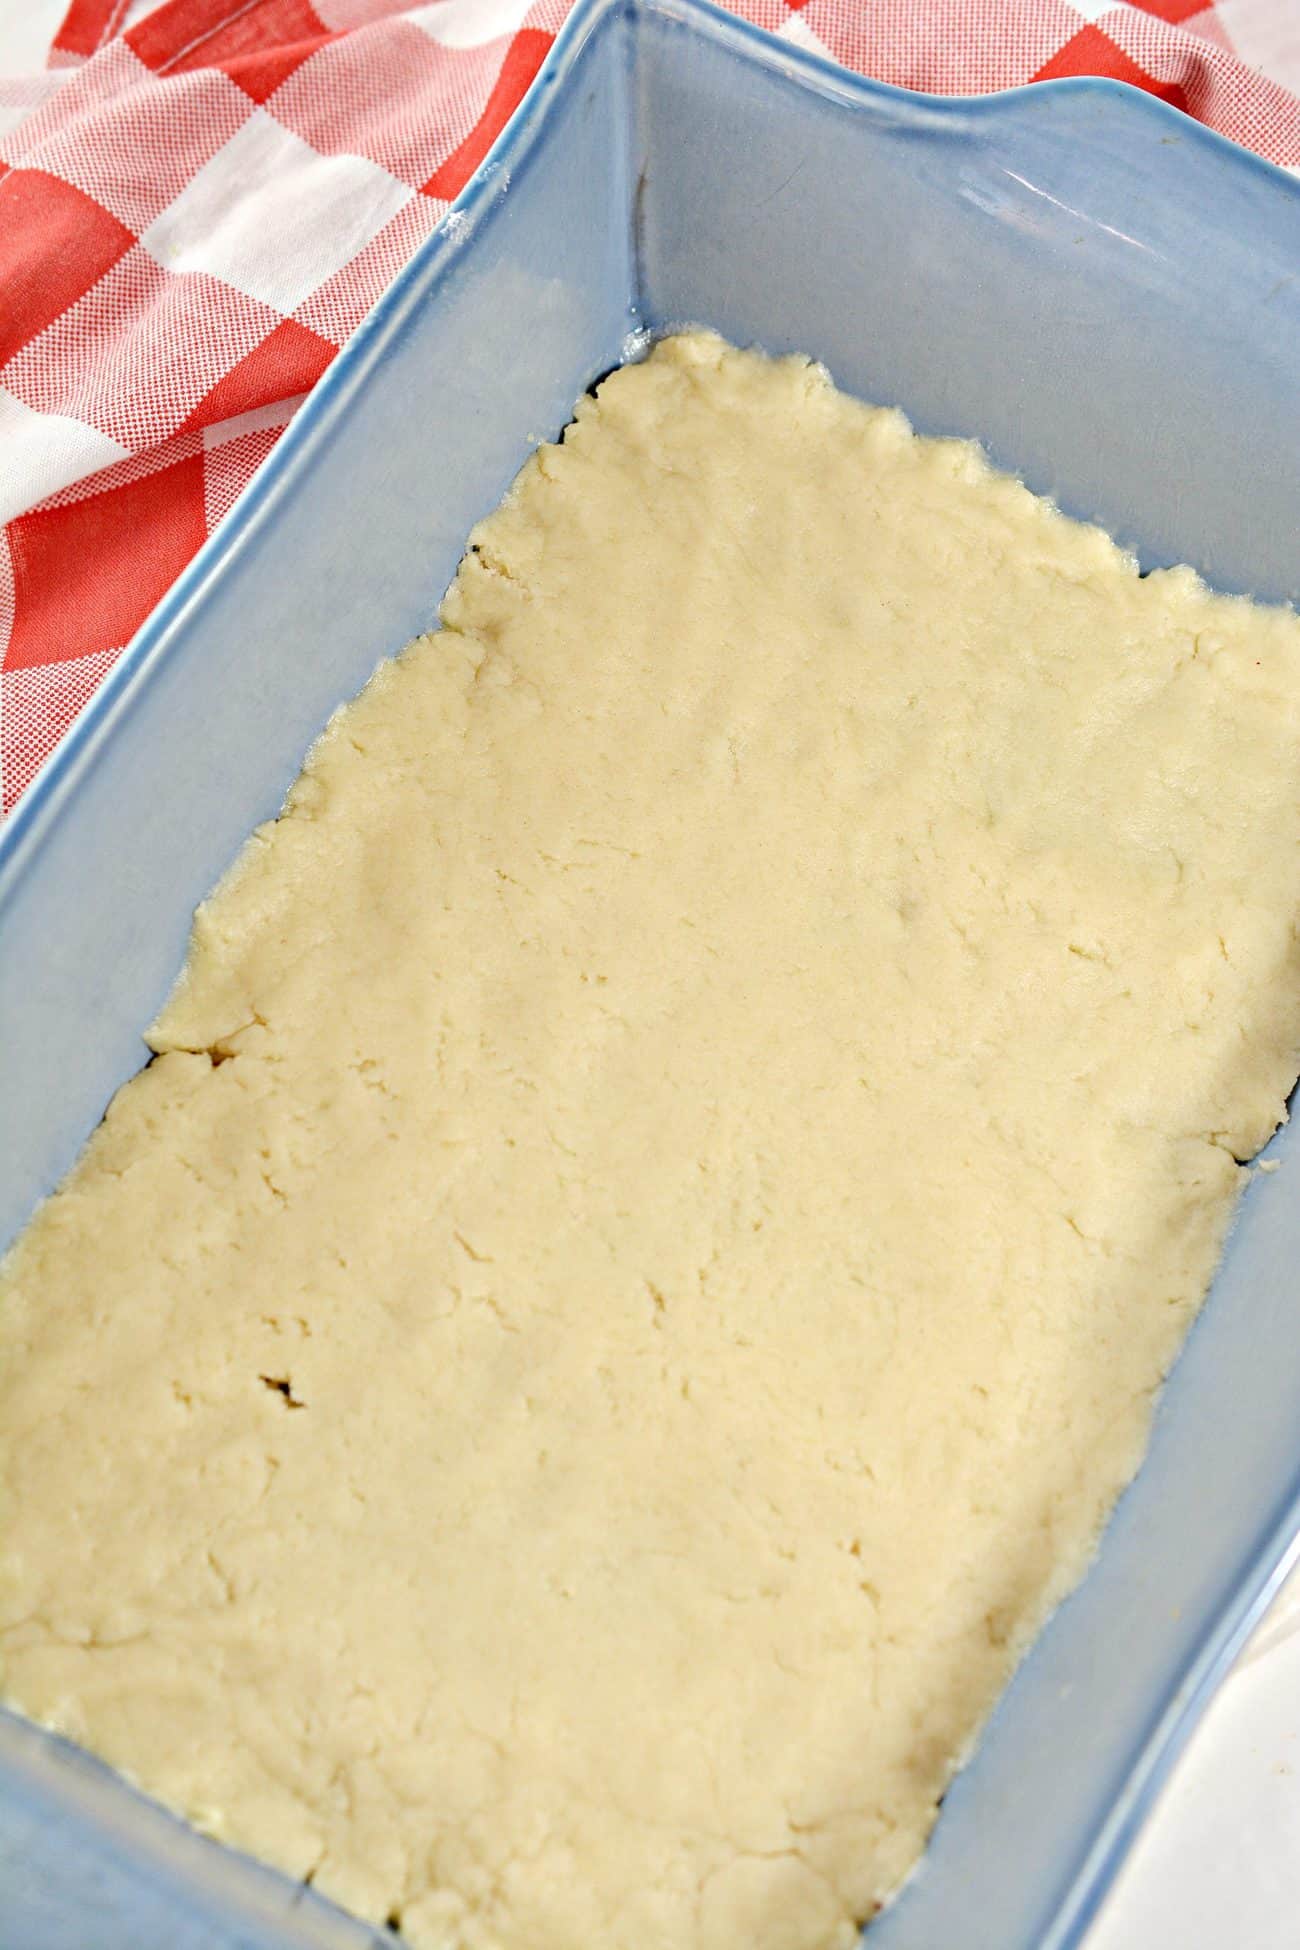 Divide the dough in half, and press half of it into the bottom of a well-greased 9x13 baking dish.